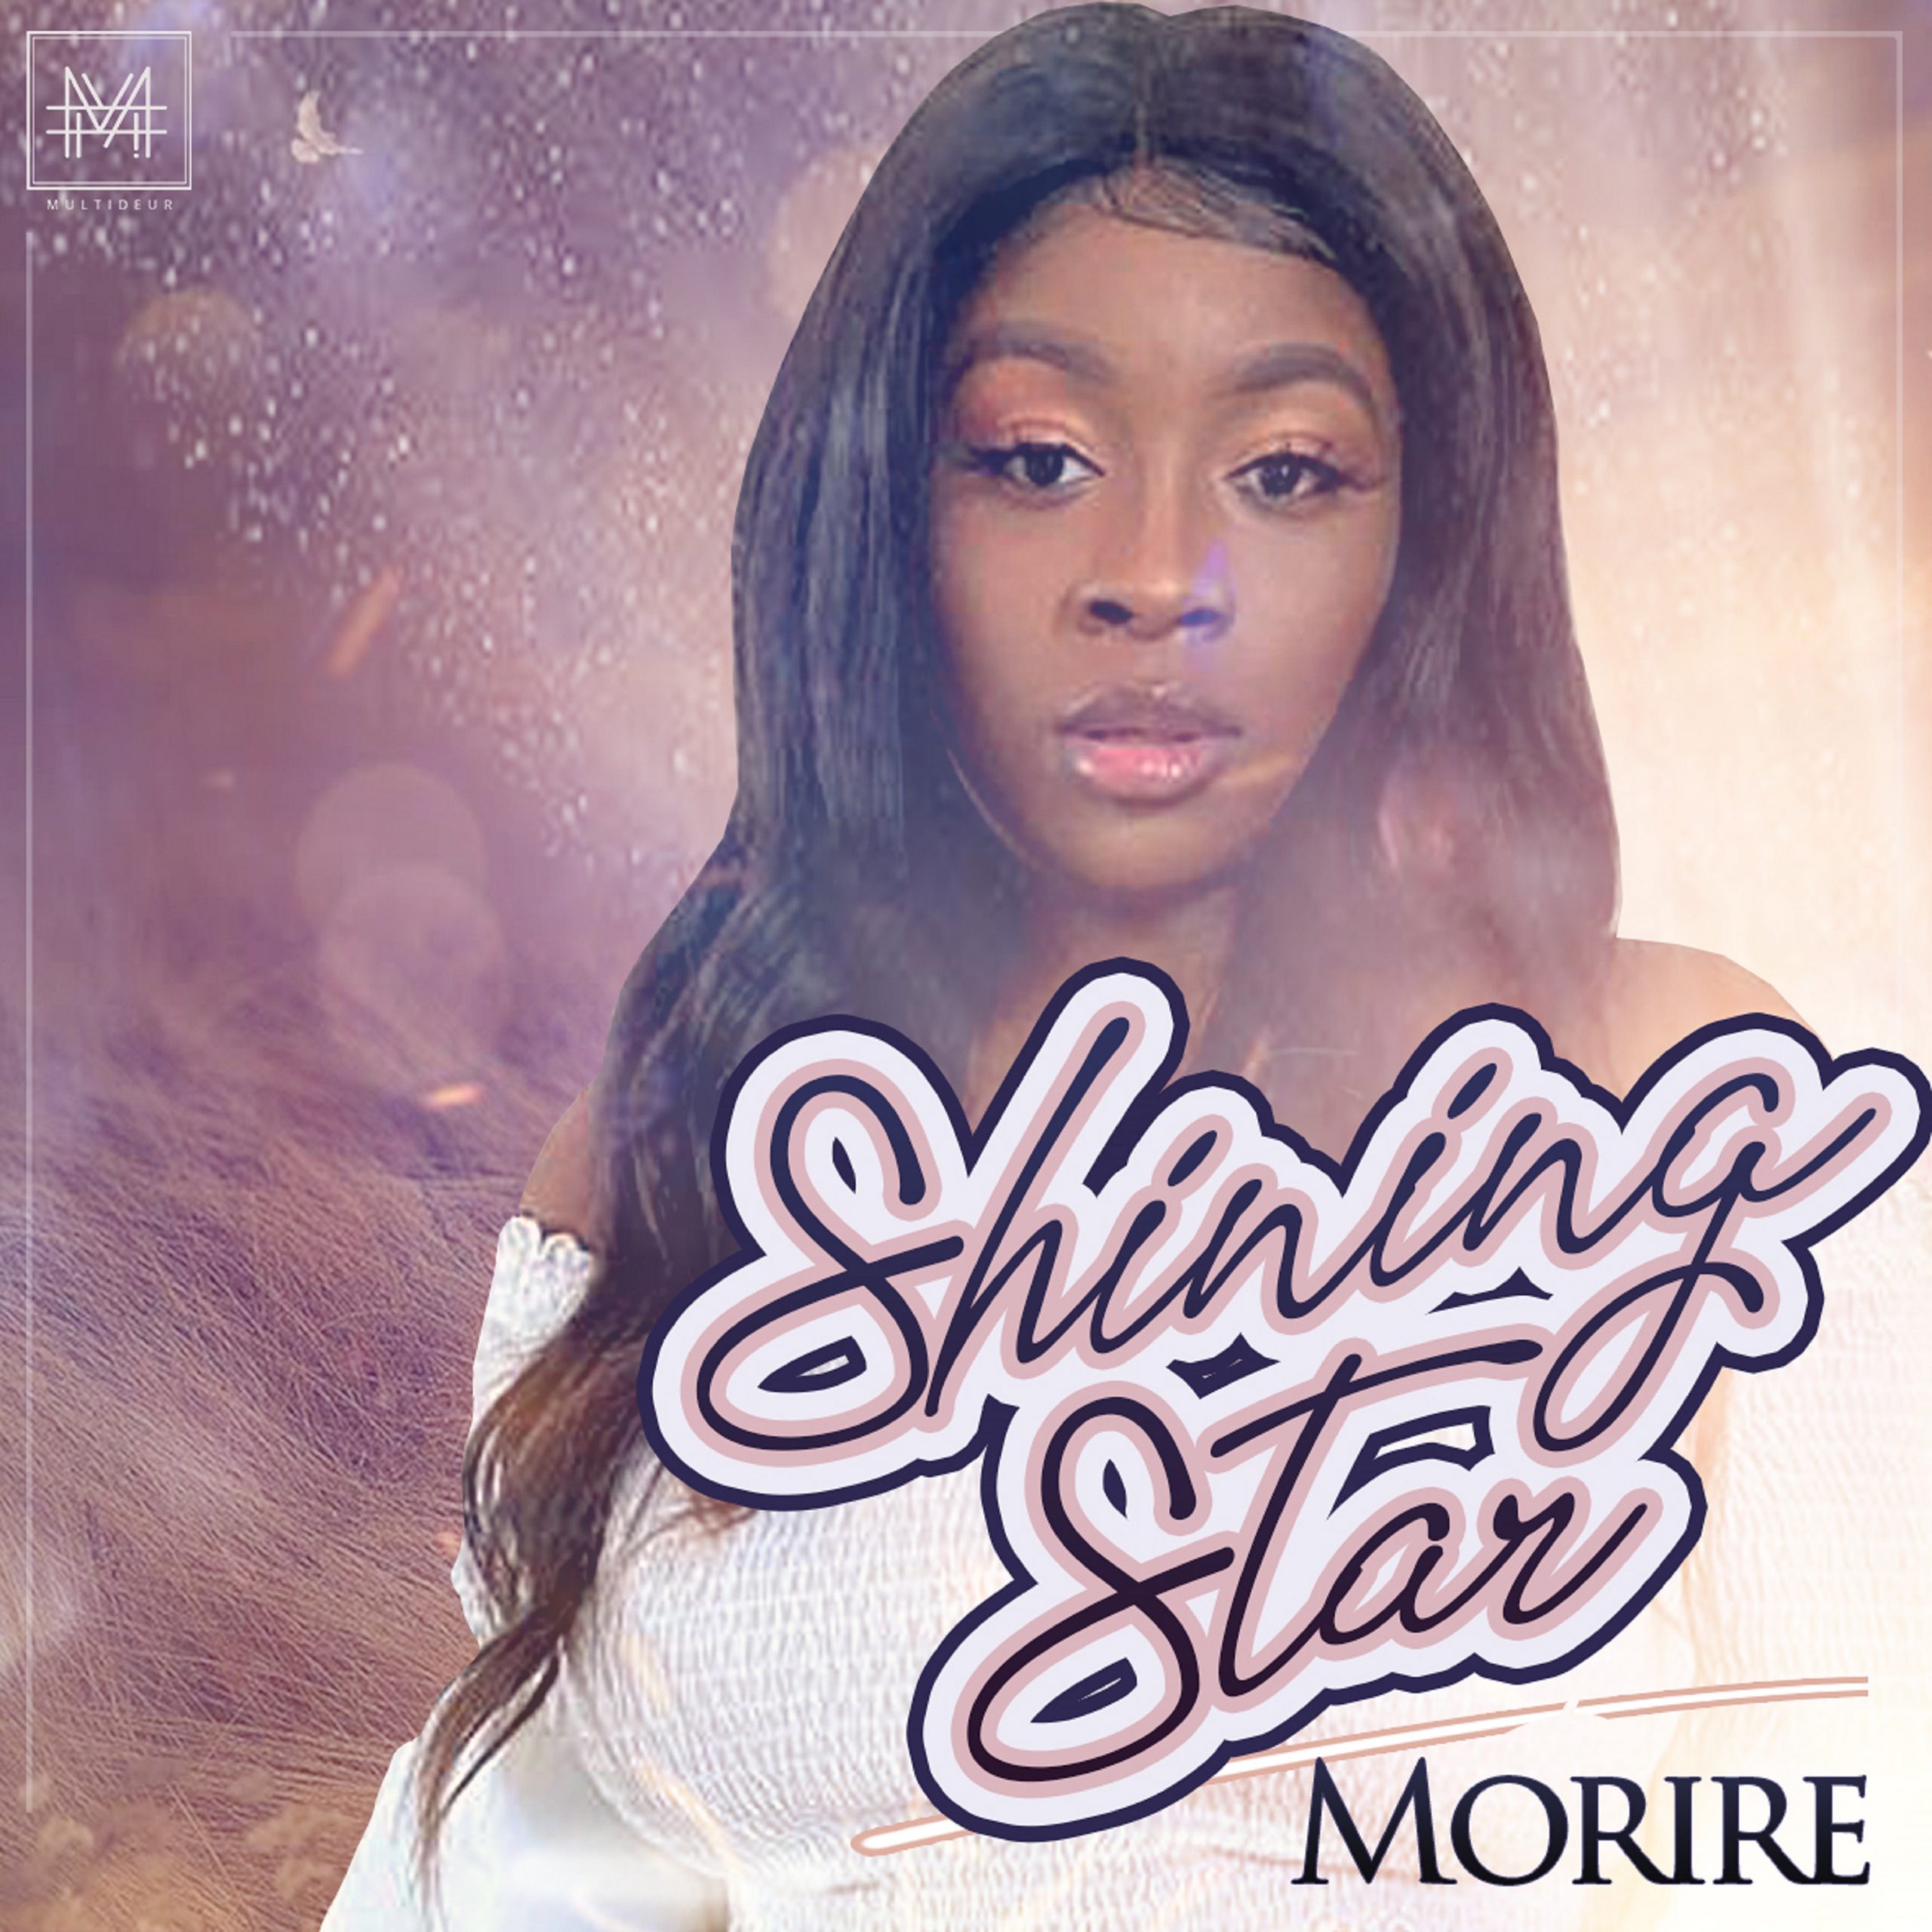 Shining Star by Morire